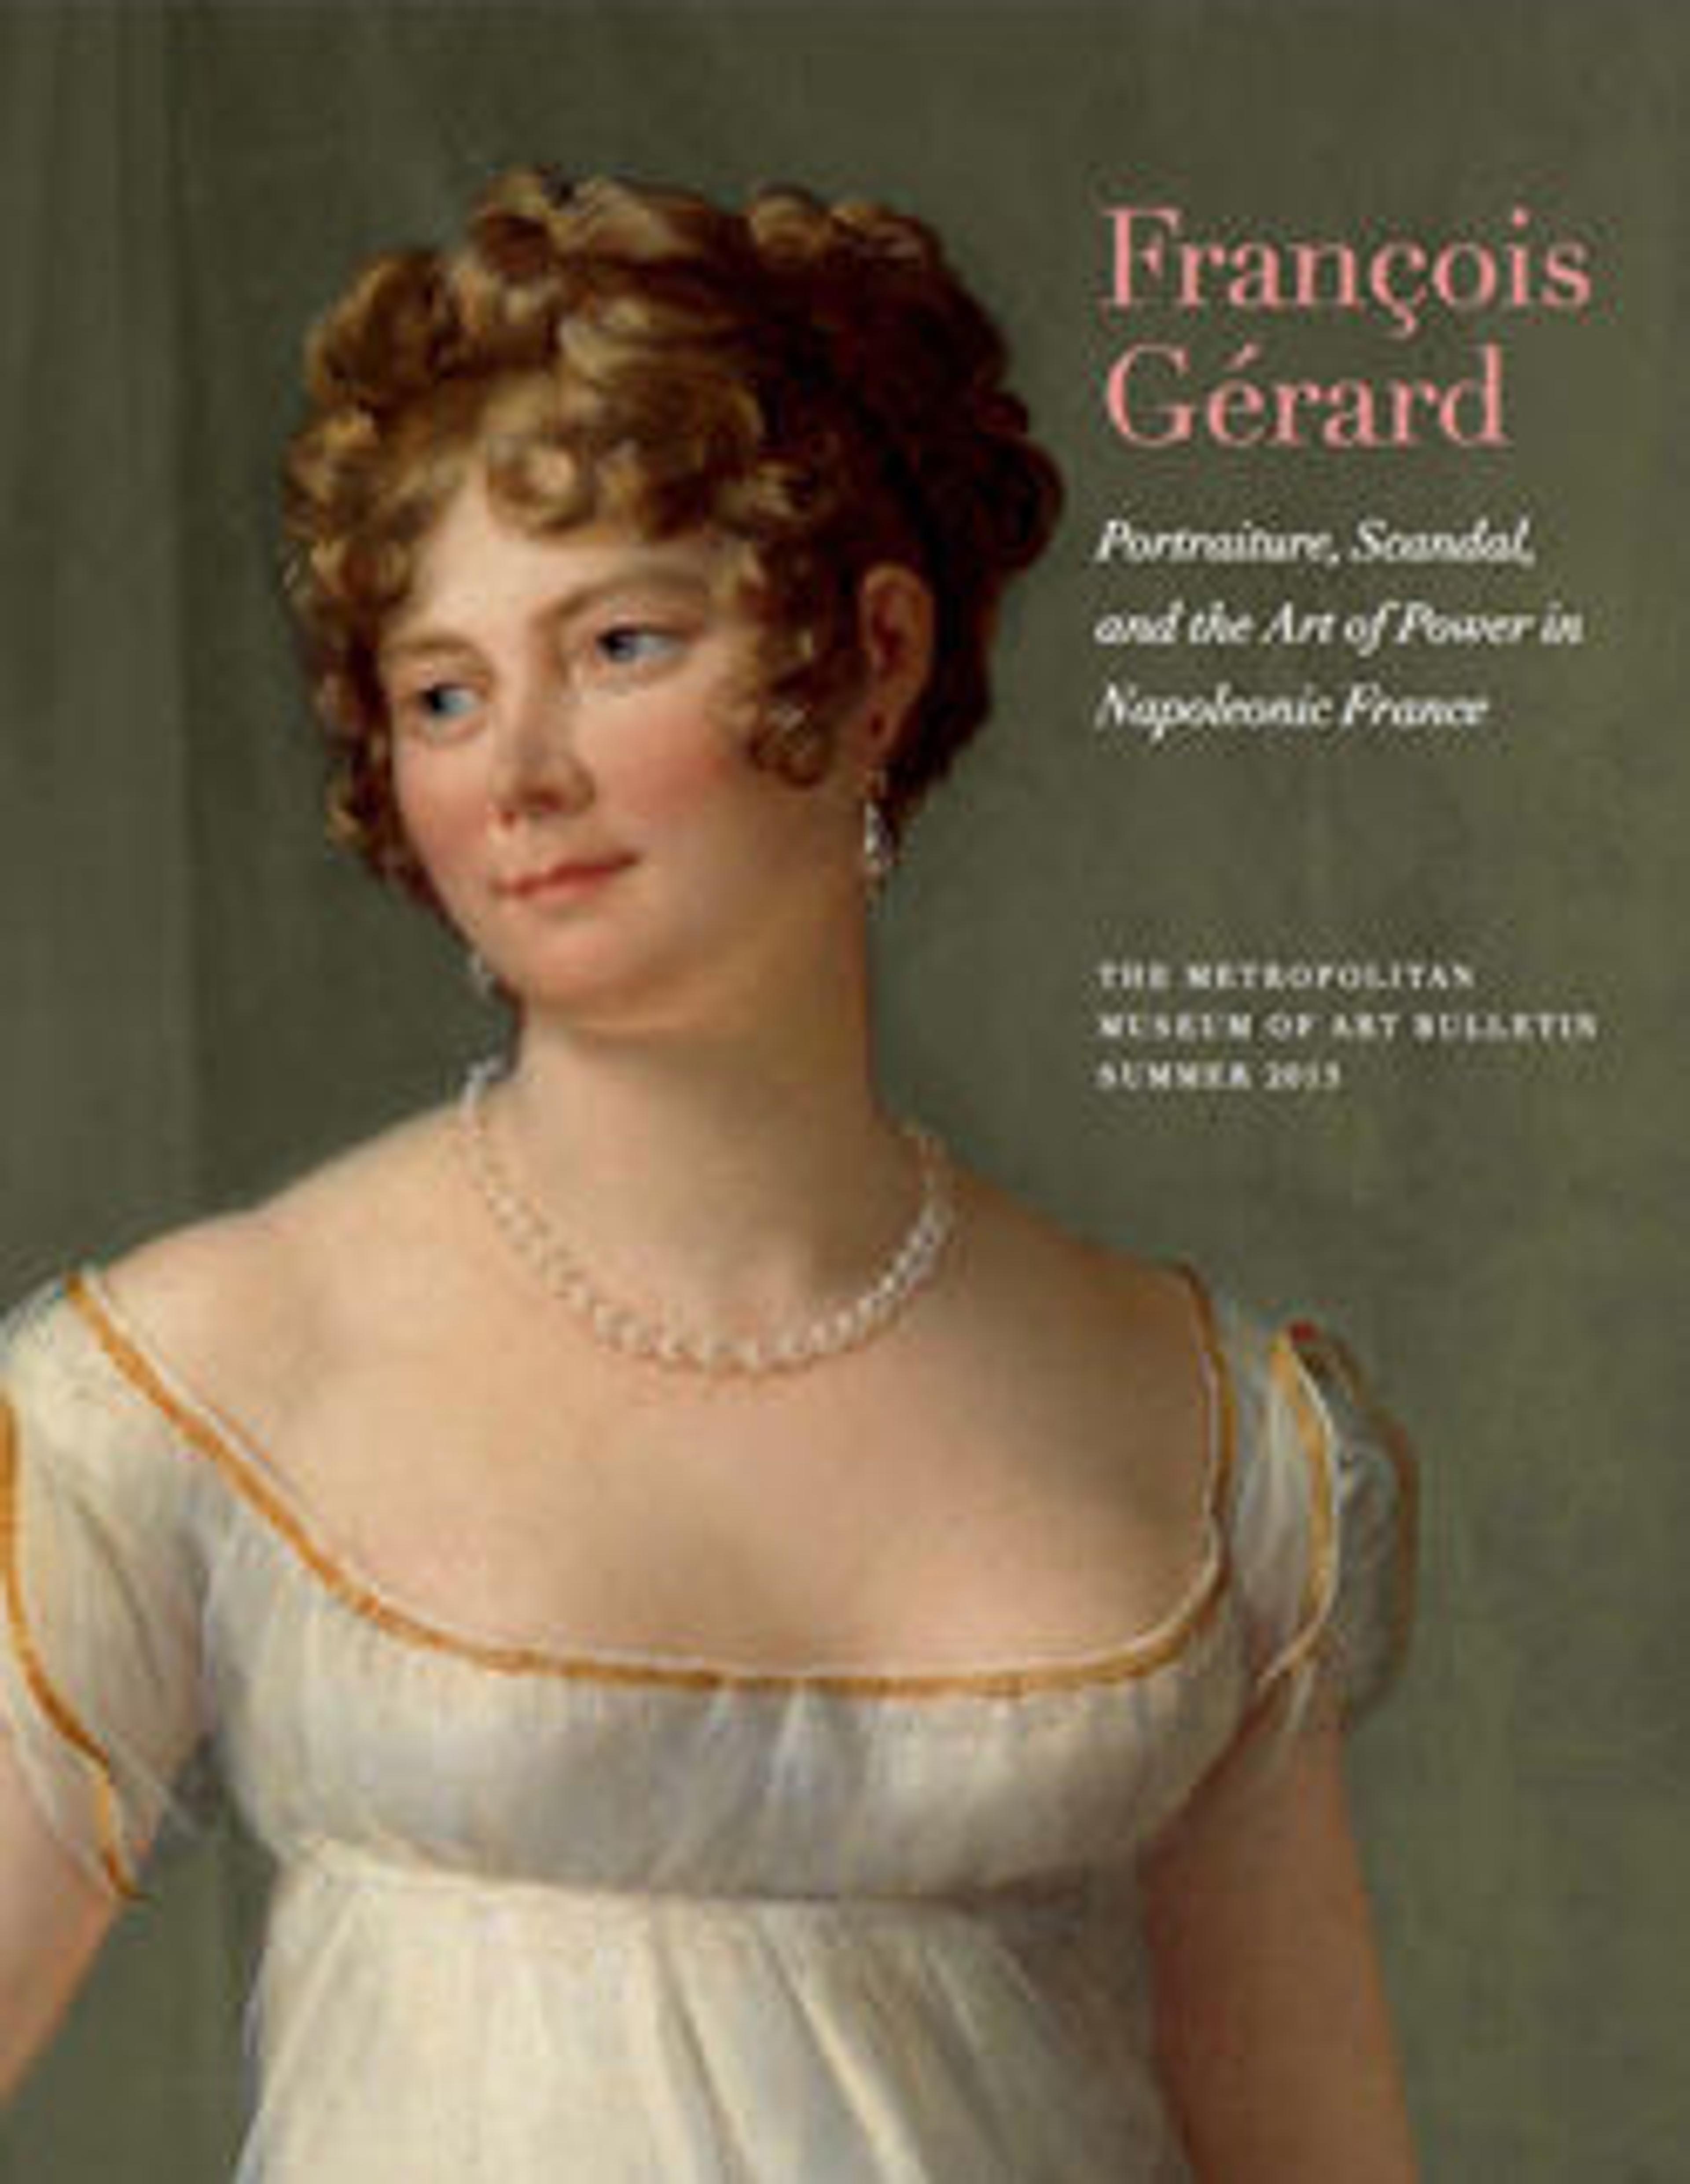 "Francois Gerard: Portraiture, Scandal, and the Art of Power in Napoleonic France": The Metropolitan Museum of Art Bulletin, v. 71, no. 1 (Summer, 2013)